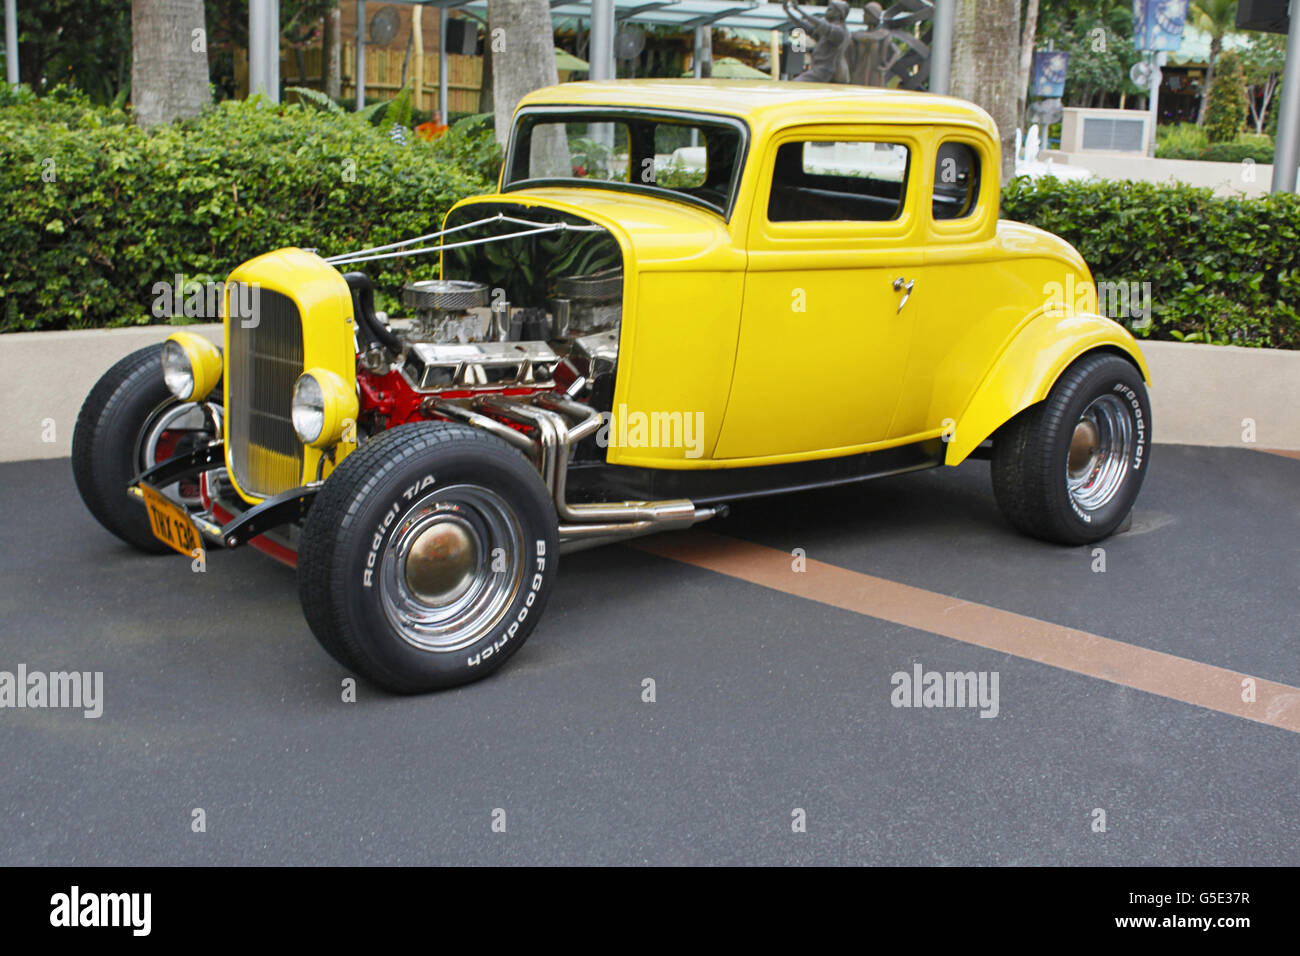 Yellow 1932 Ford Coupe converted to Hotrod, Universal Studio, Singapore Stock Photo